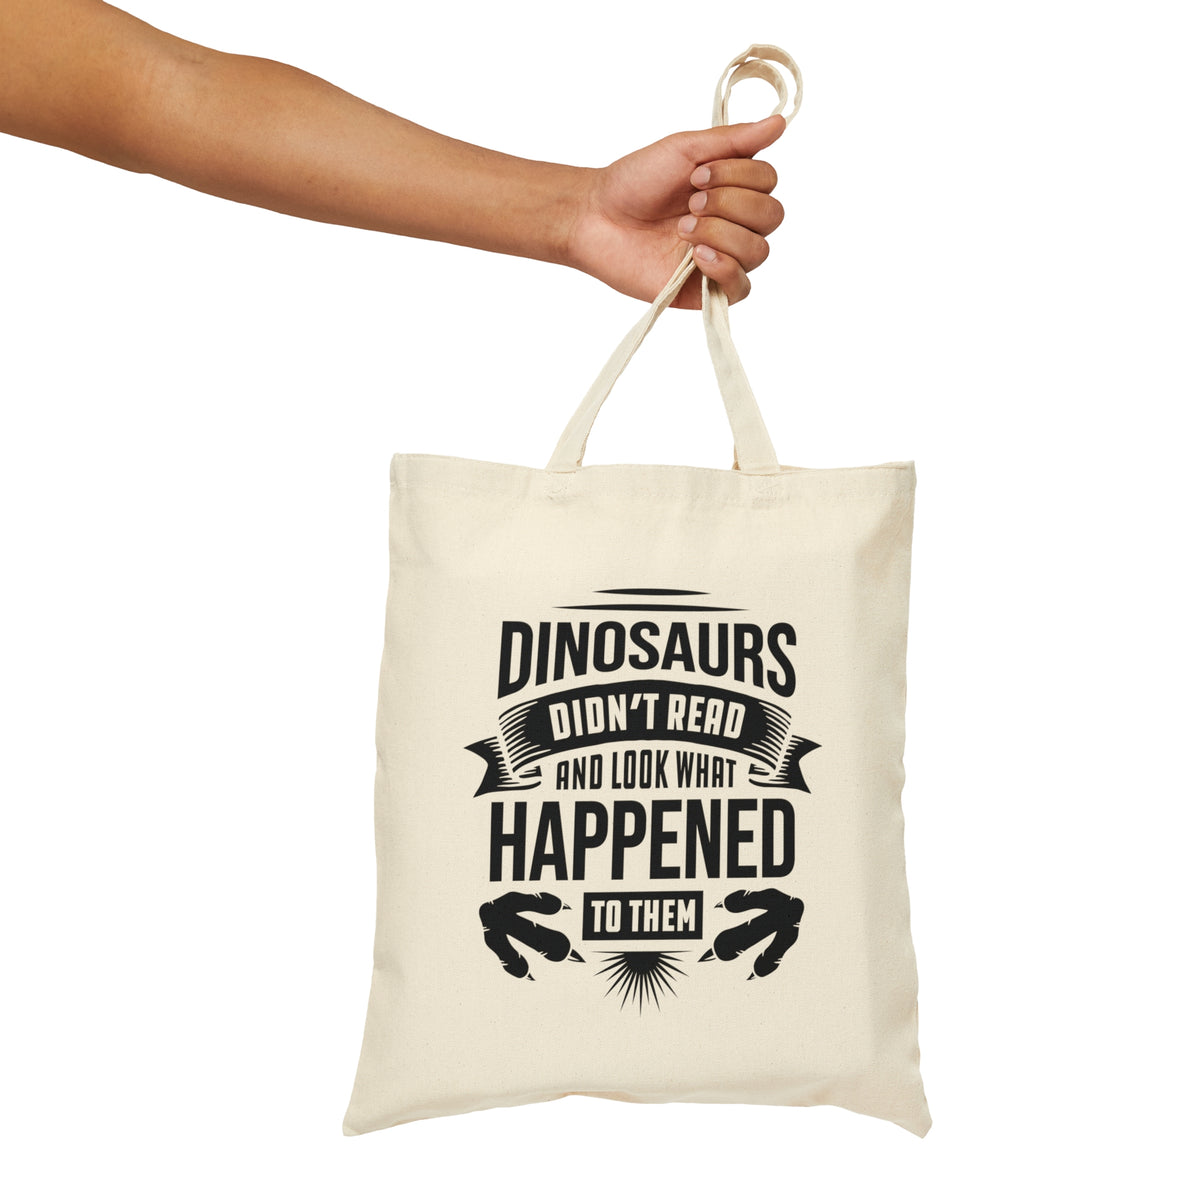 Dinosaurs Didn't Read Book Worm Reading Tote Bag | Library Gift Book Bag | Cotton Canvas Tote Bag